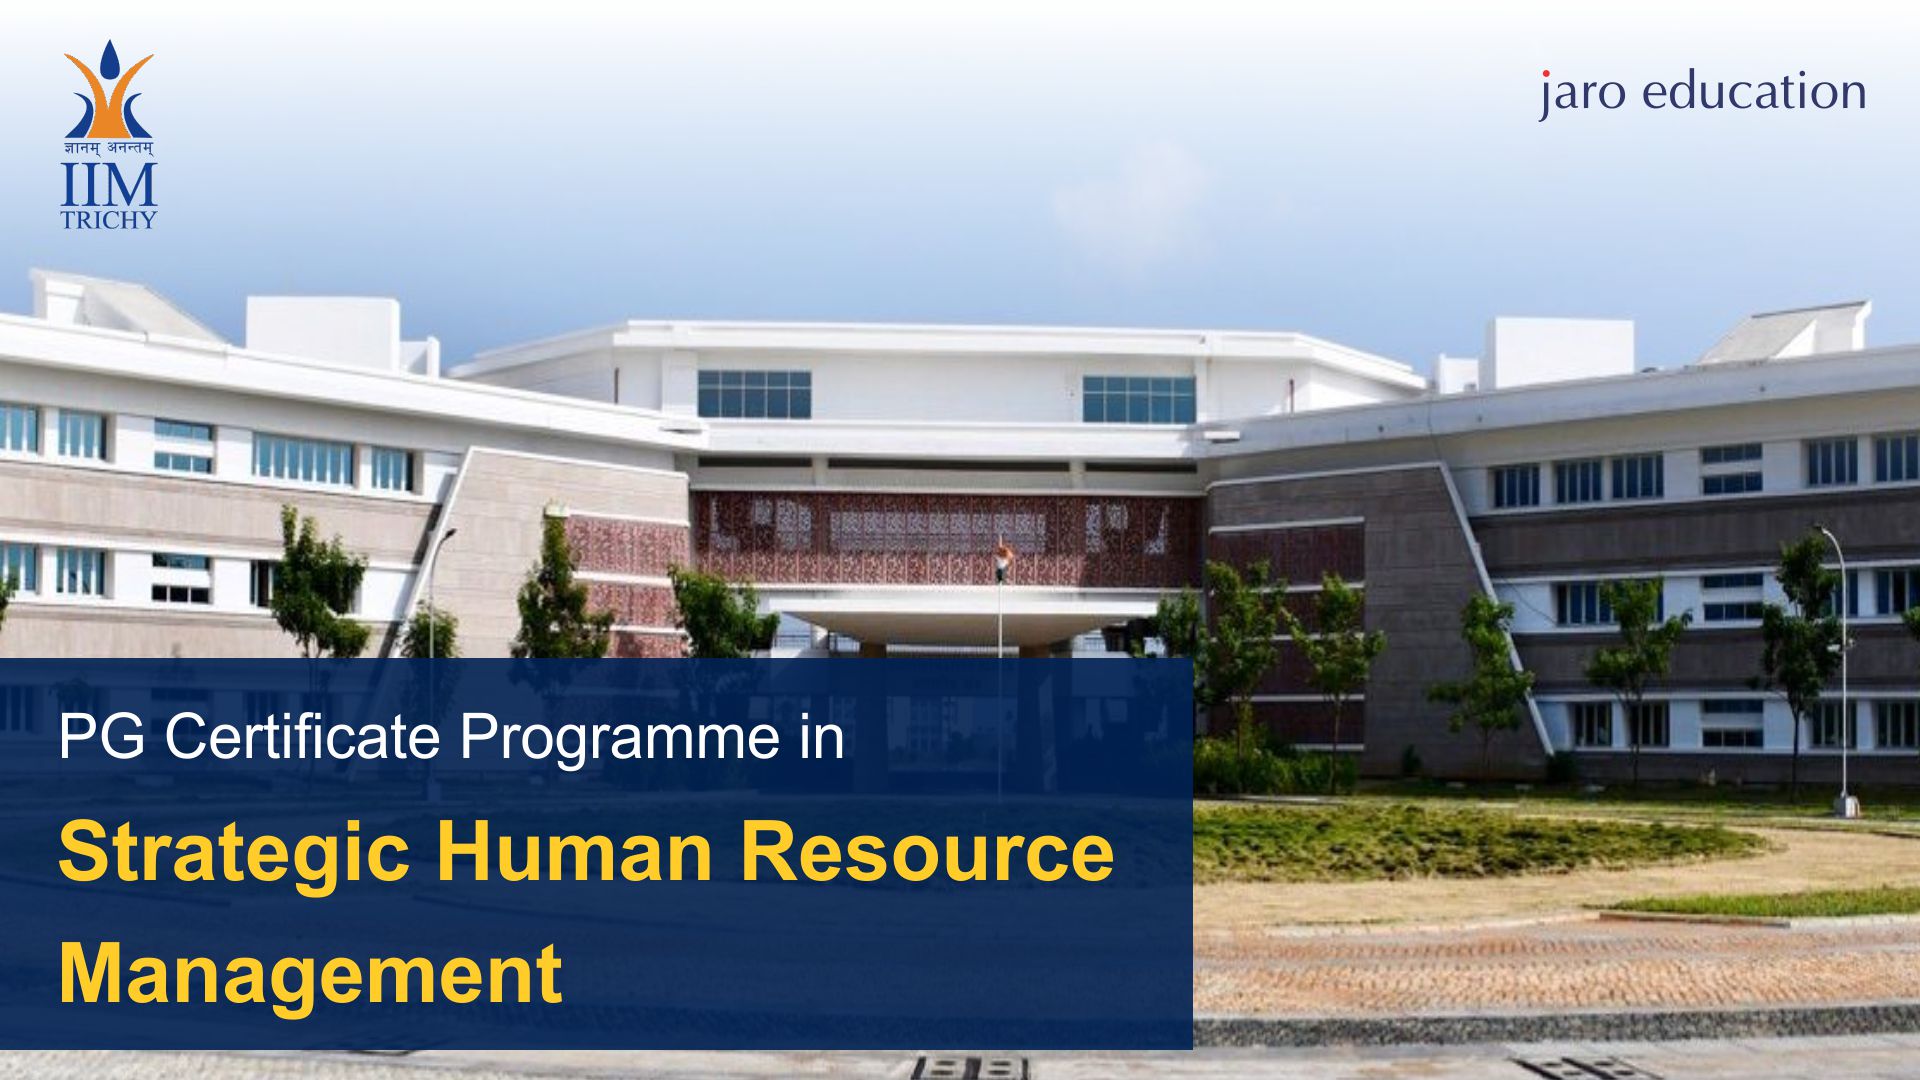 PG Certificate Programme in Strategic Human Resource Management